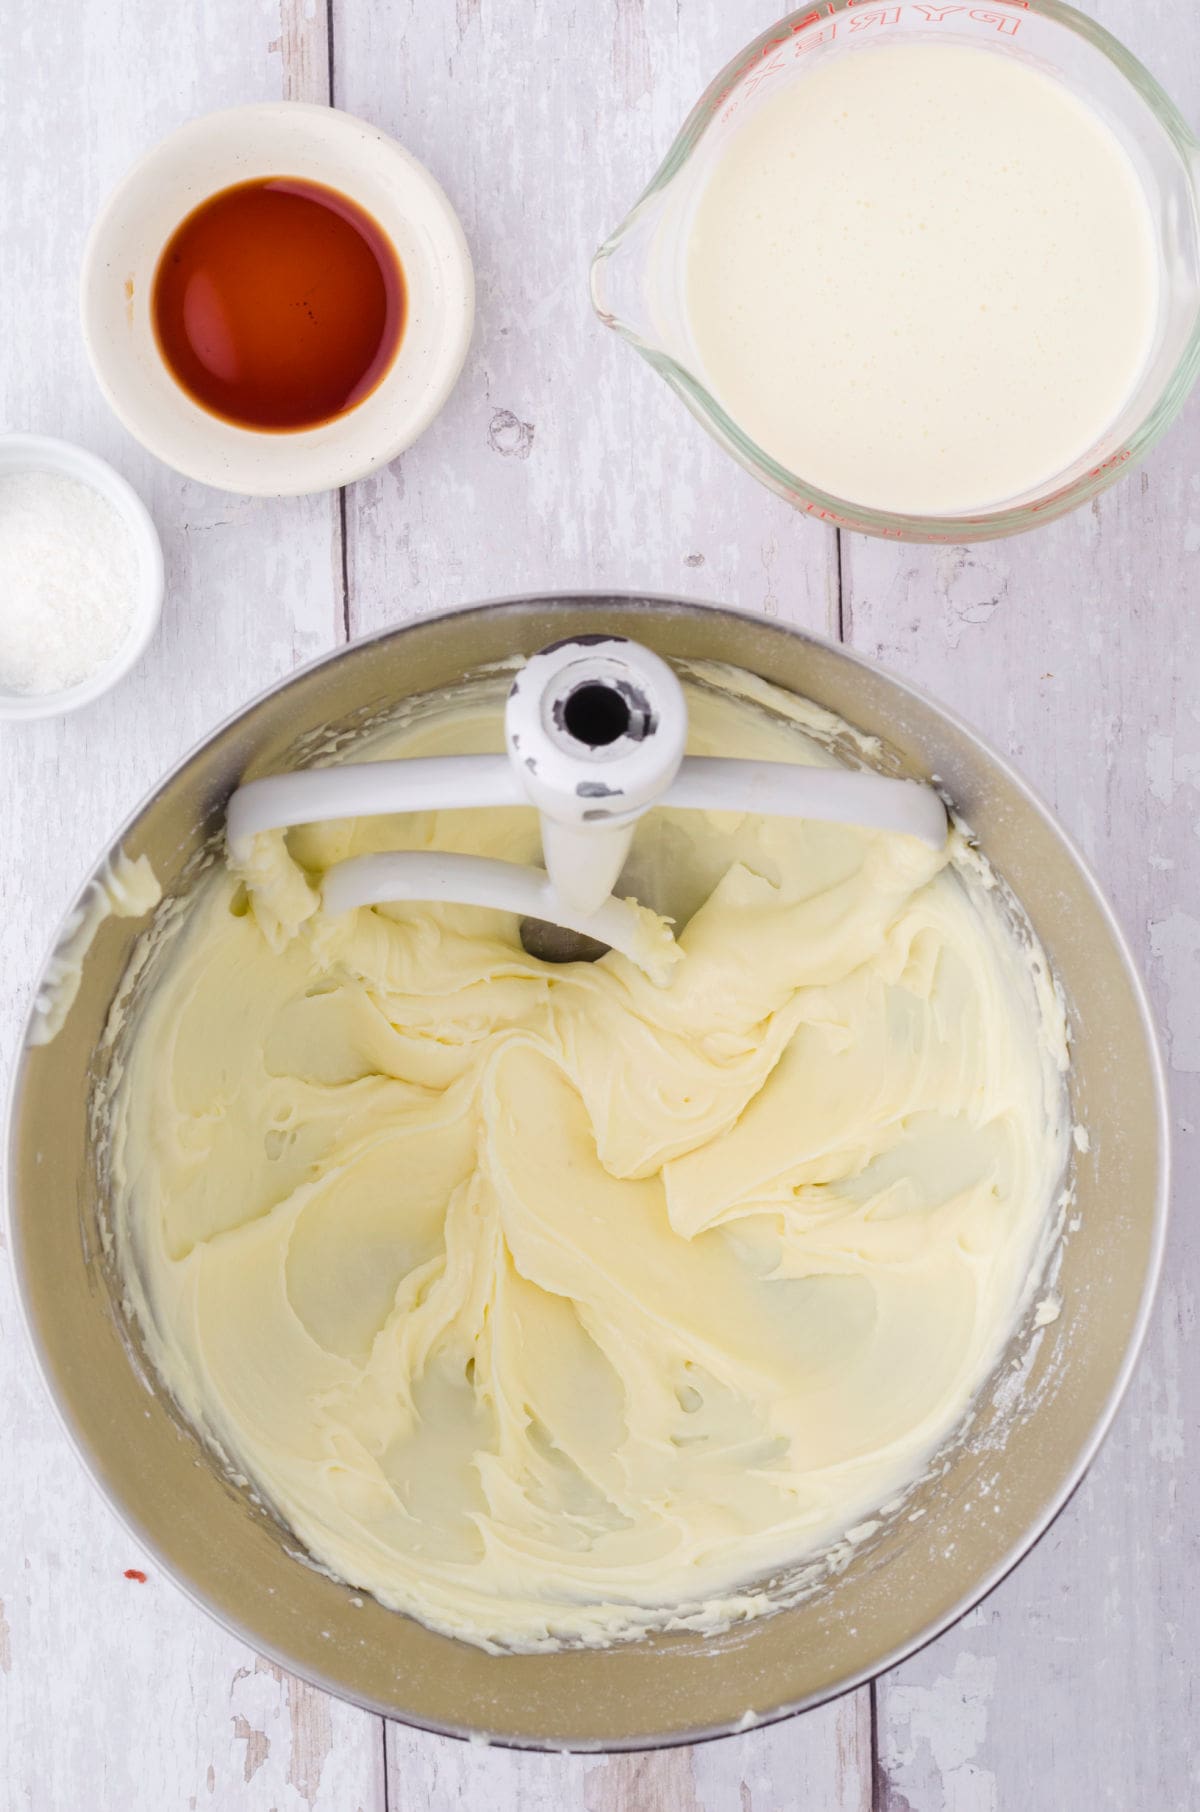 Cream cheese frosting being made in a bowl.